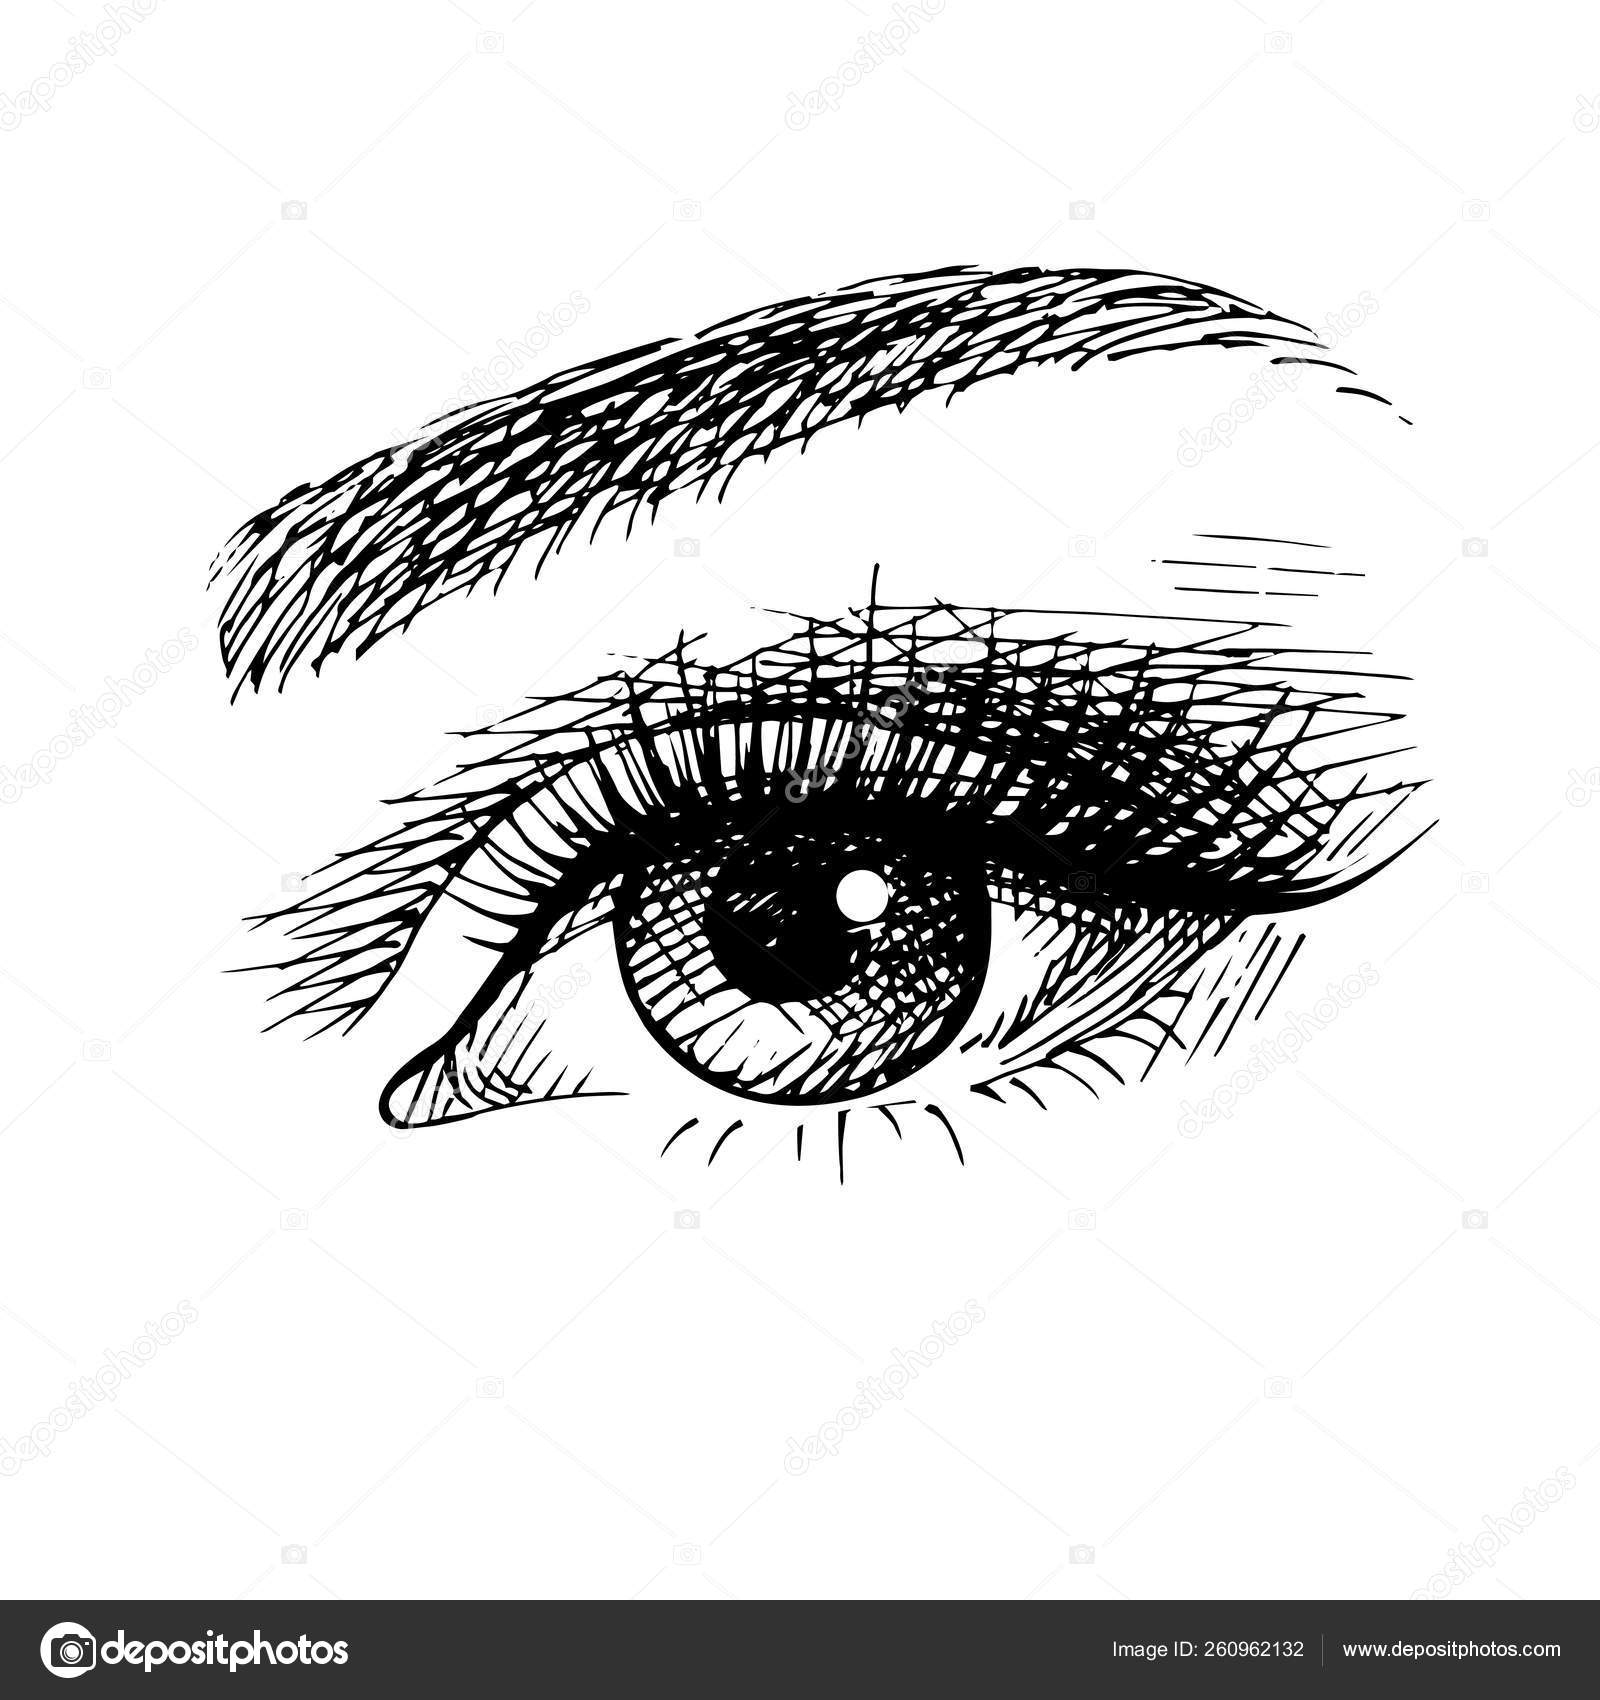 How to Draw Eyes Male Vs Female Step by Step - Narrated - YouTube